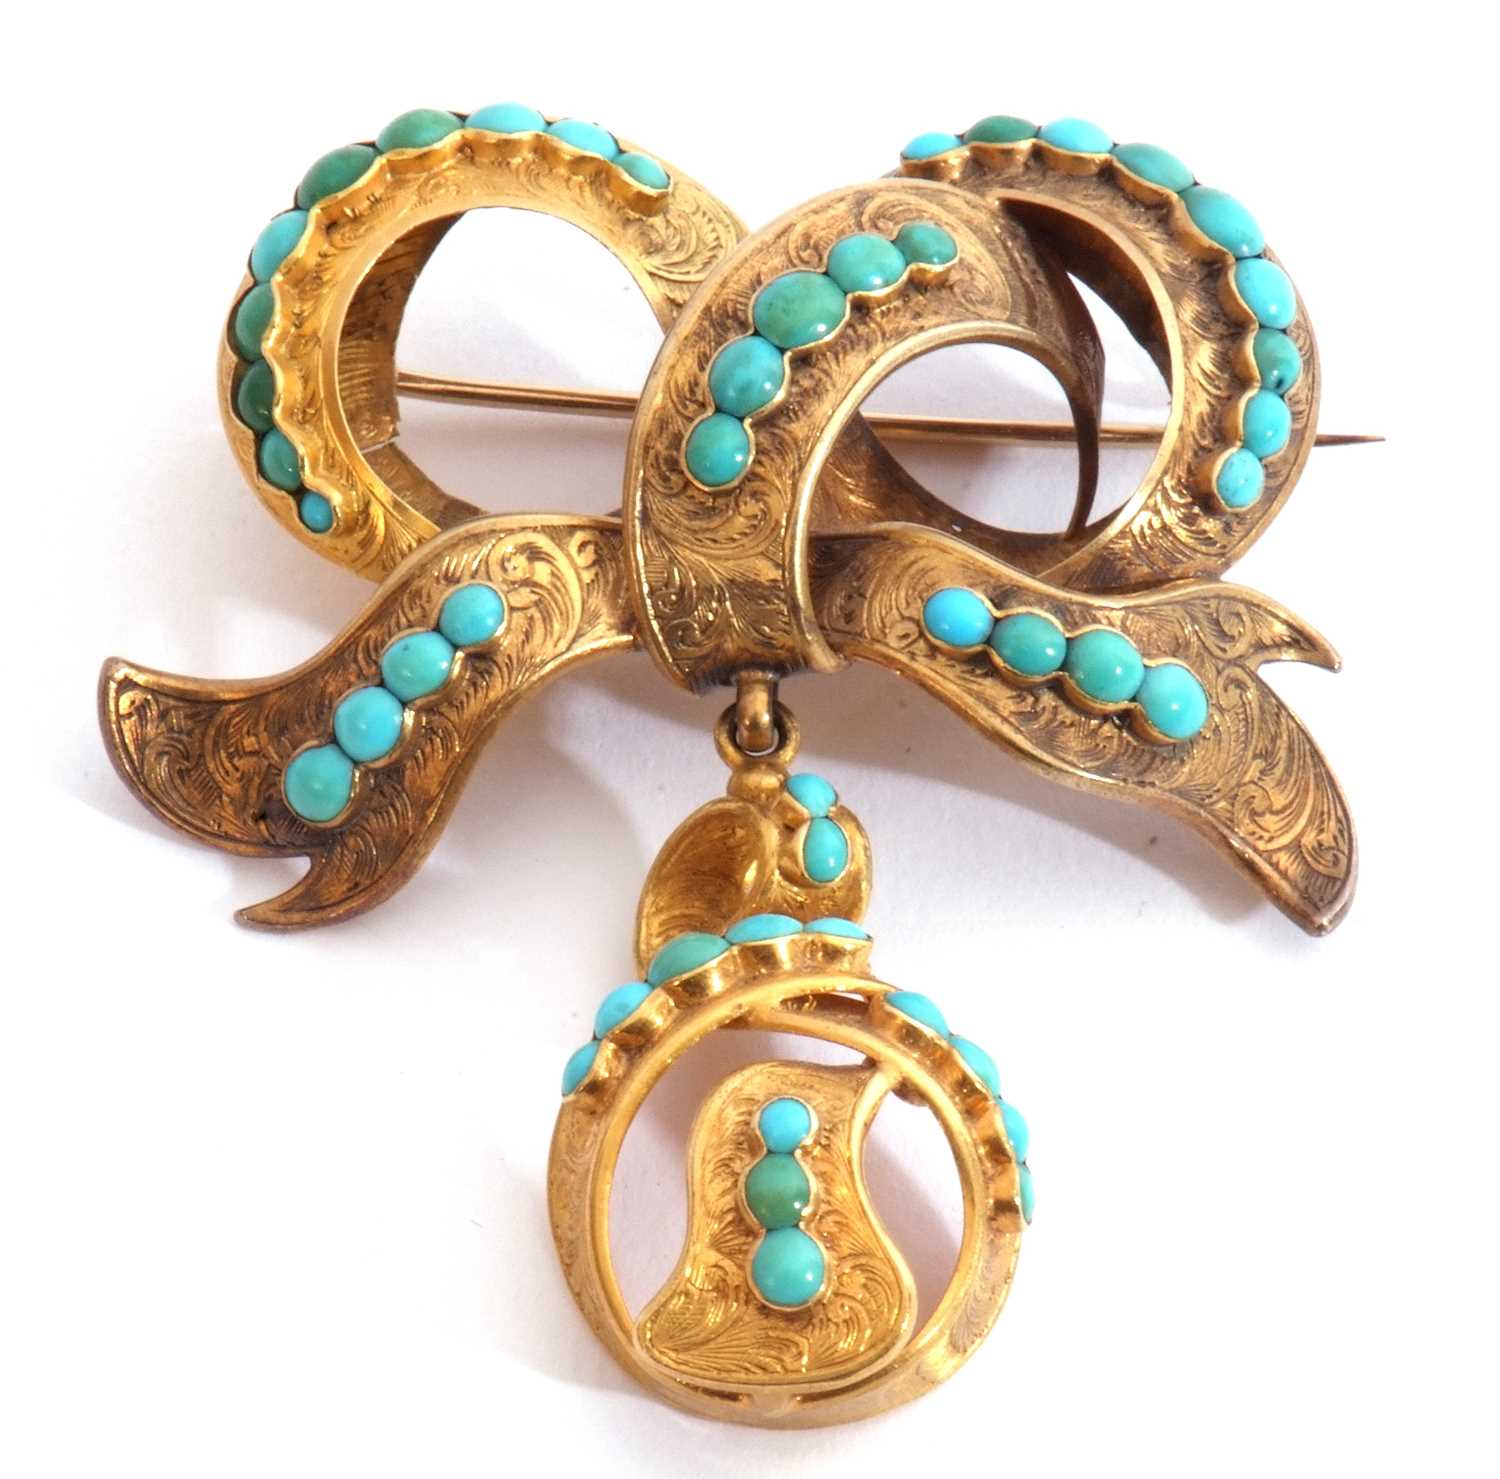 Antique gold and turquoise brooch, a tied ribbon design suspending a knotted ribbon, set